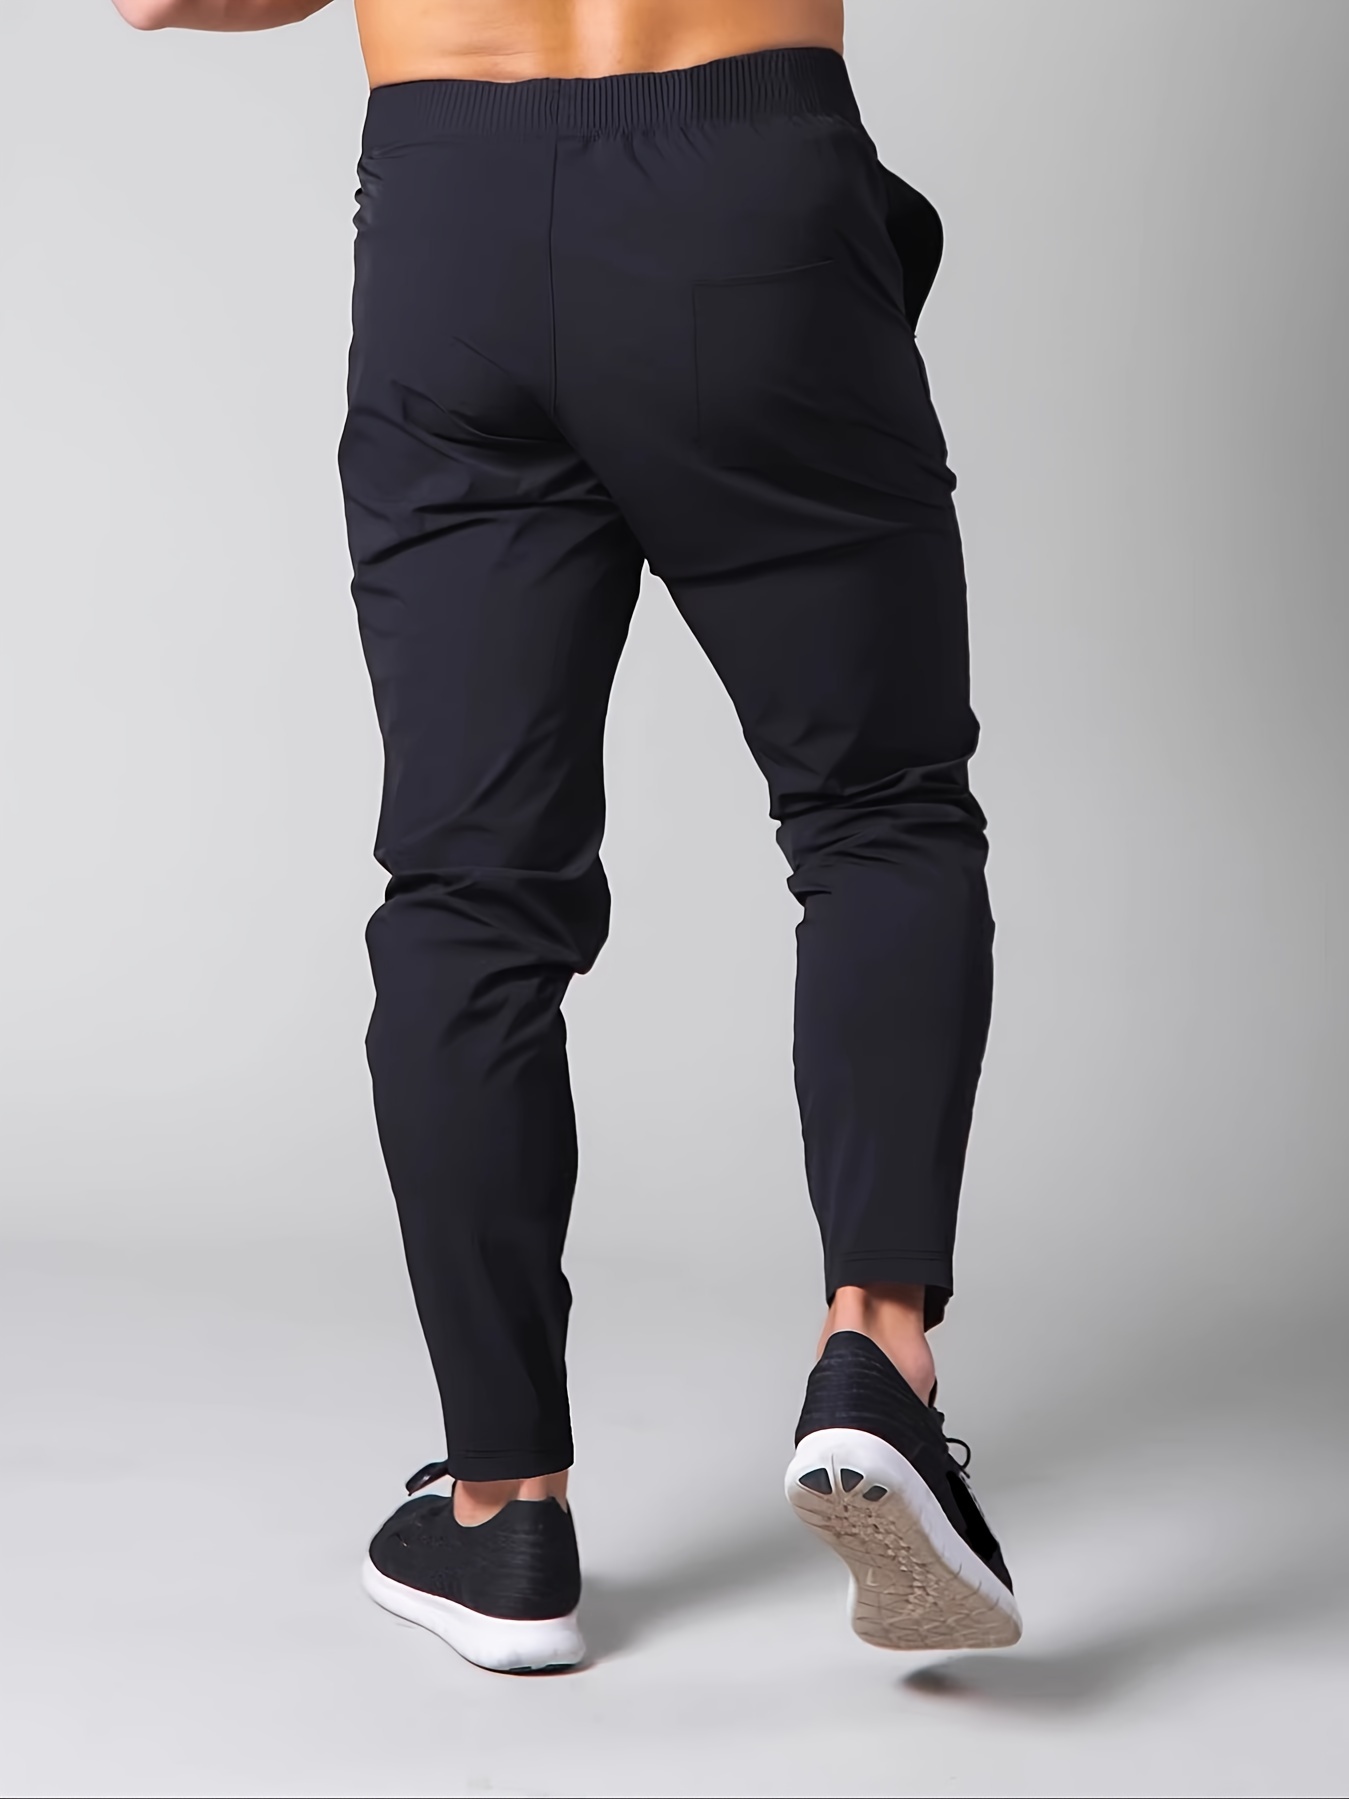 Loose Large Size Slimming Trousers Durable Workout Joggers Gym Sports Pants  For Summer Sport Casual Wear